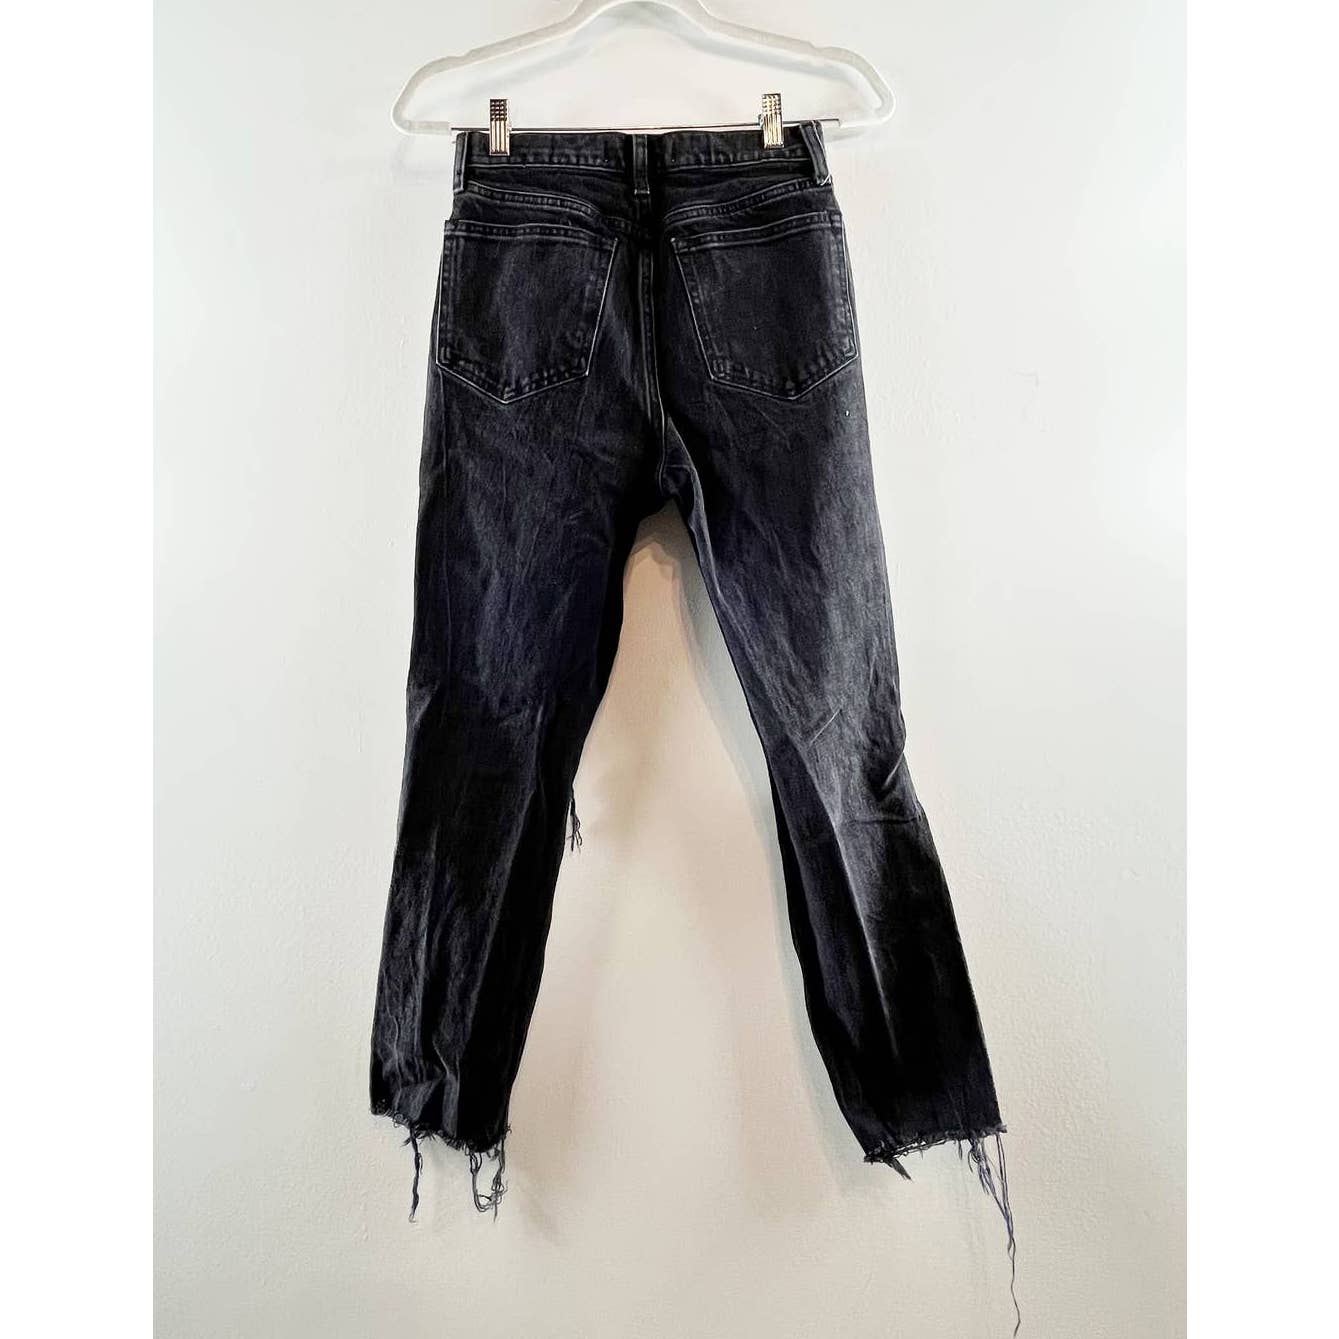 Abercrombie & Fitch Busted Knee High Rise Frayed Mom Jeans Black Wash 26 / 2s